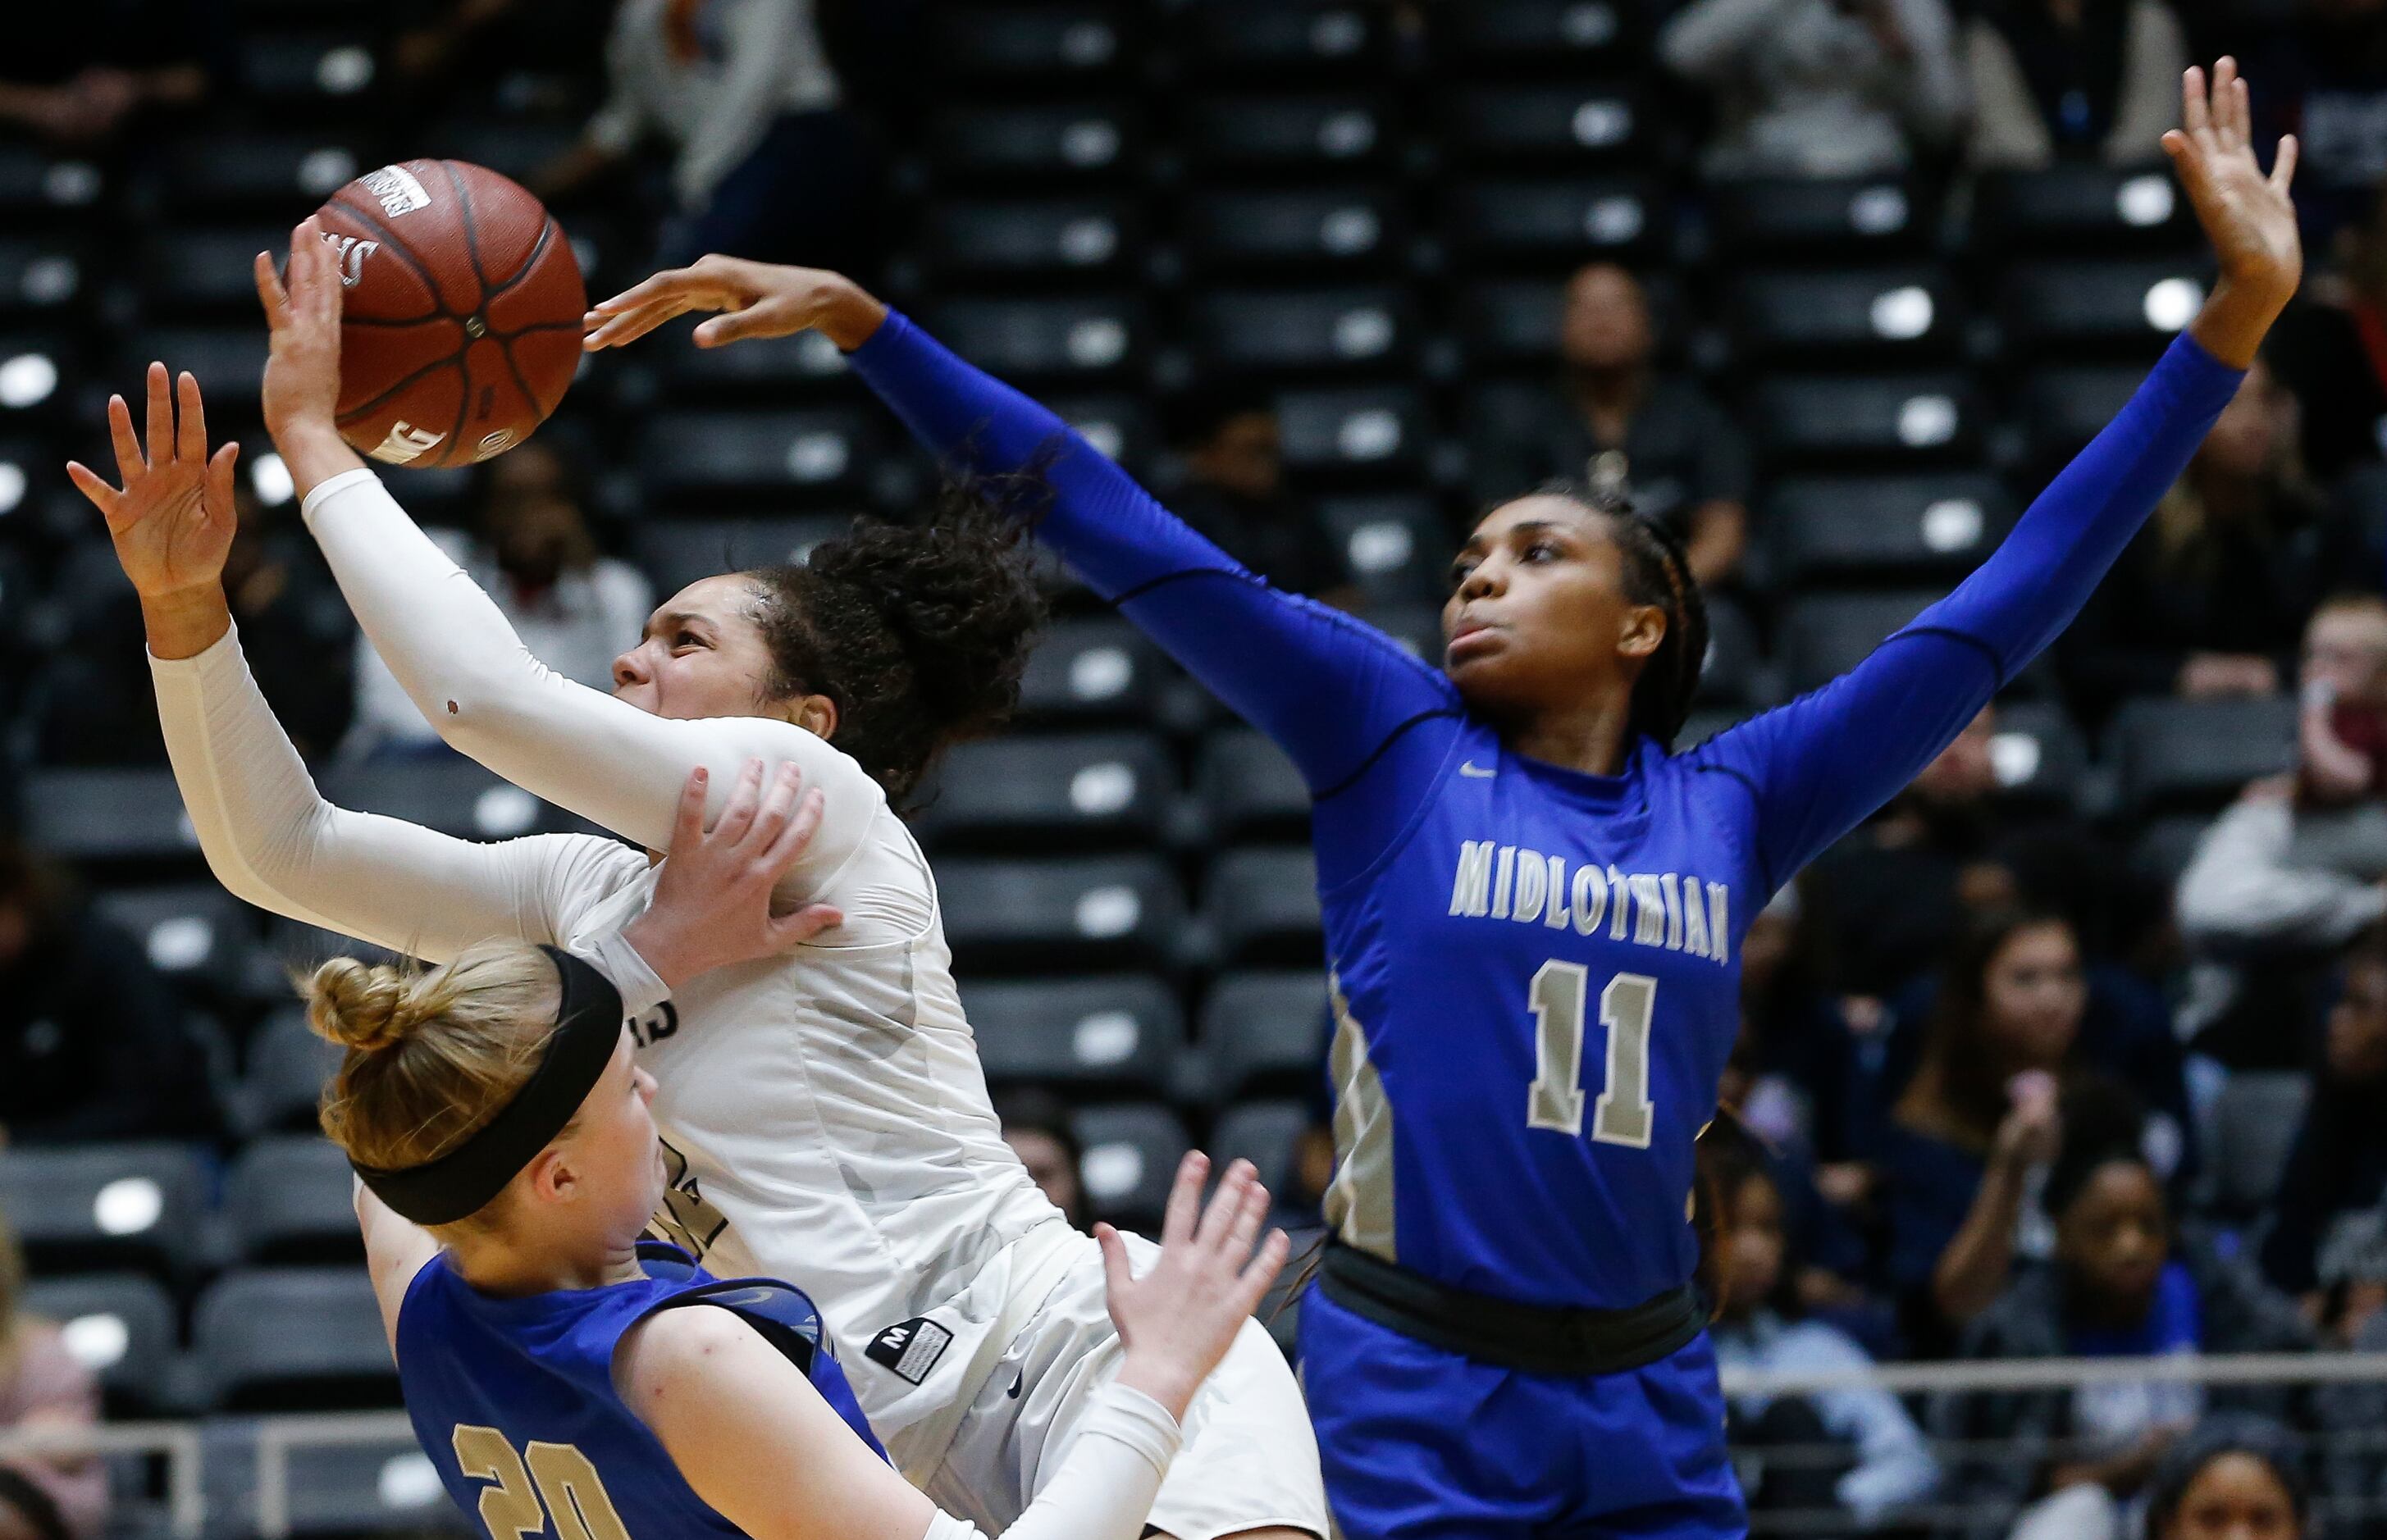 Frisco Lone Star's Kyla Deck (12) goes up for a shot over Midlothian's Hallie Mayfield (20)...